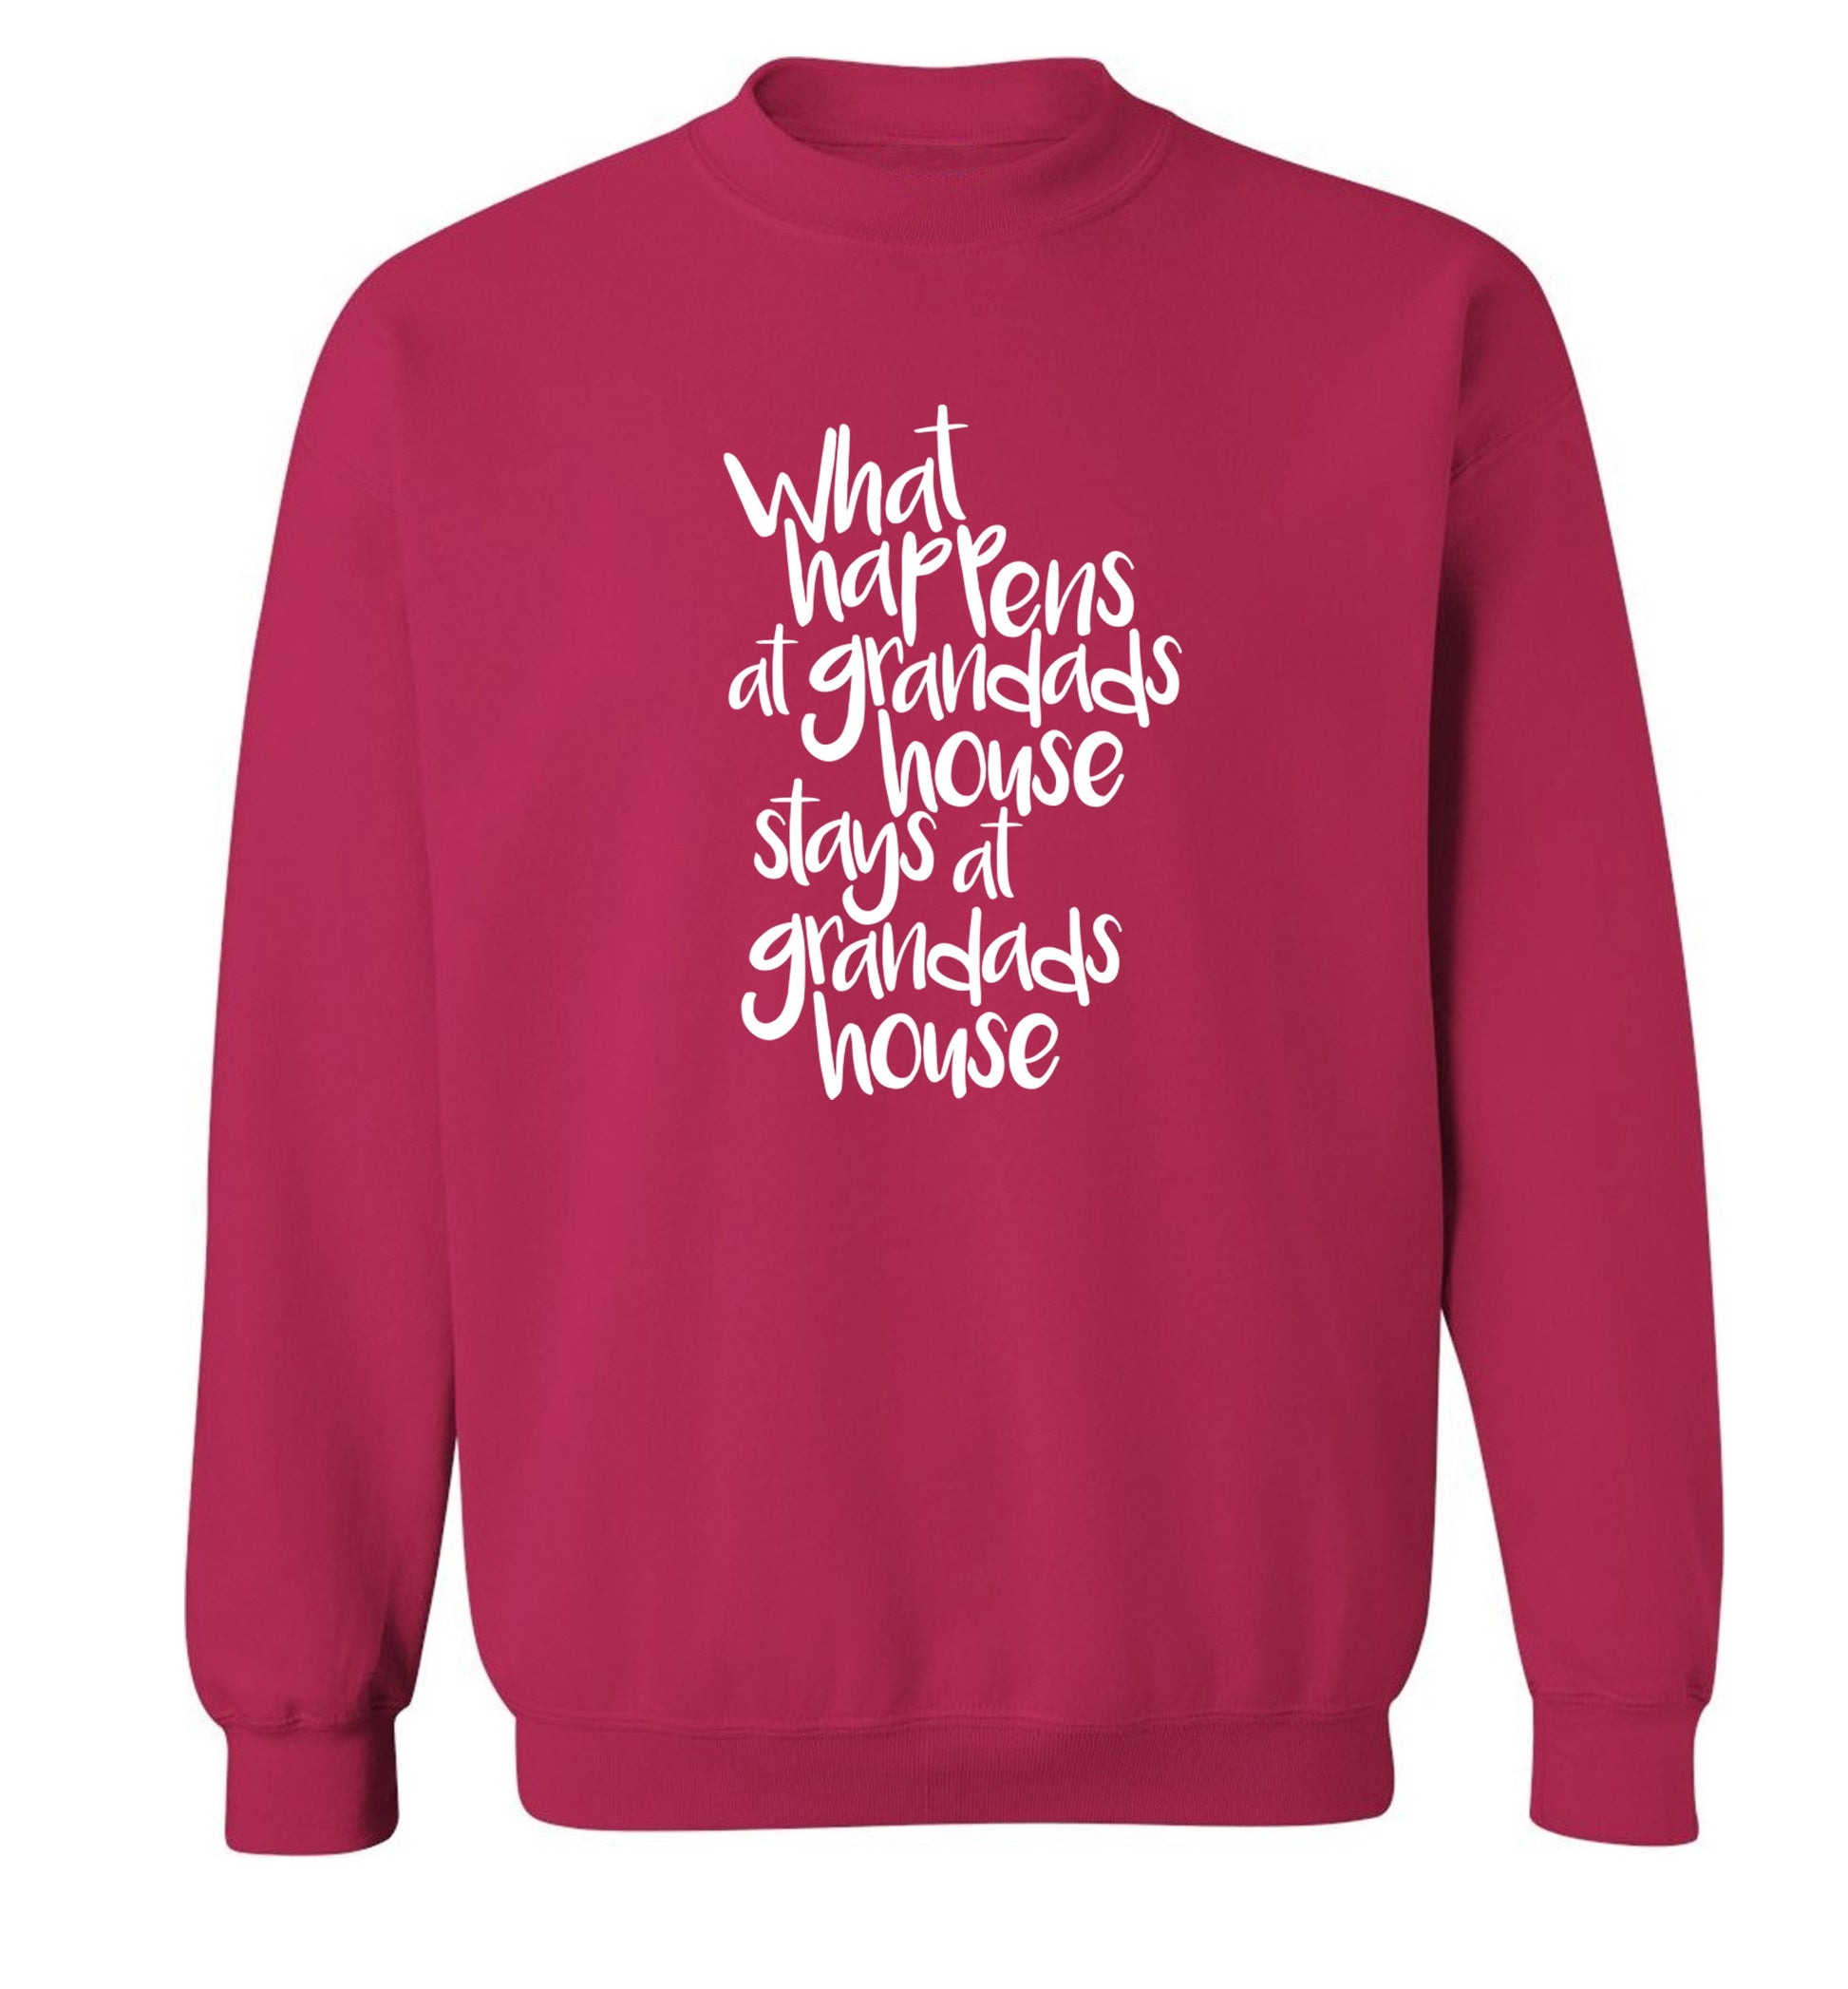 What happens at grandads house stays at grandads house Adult's unisex pink Sweater 2XL